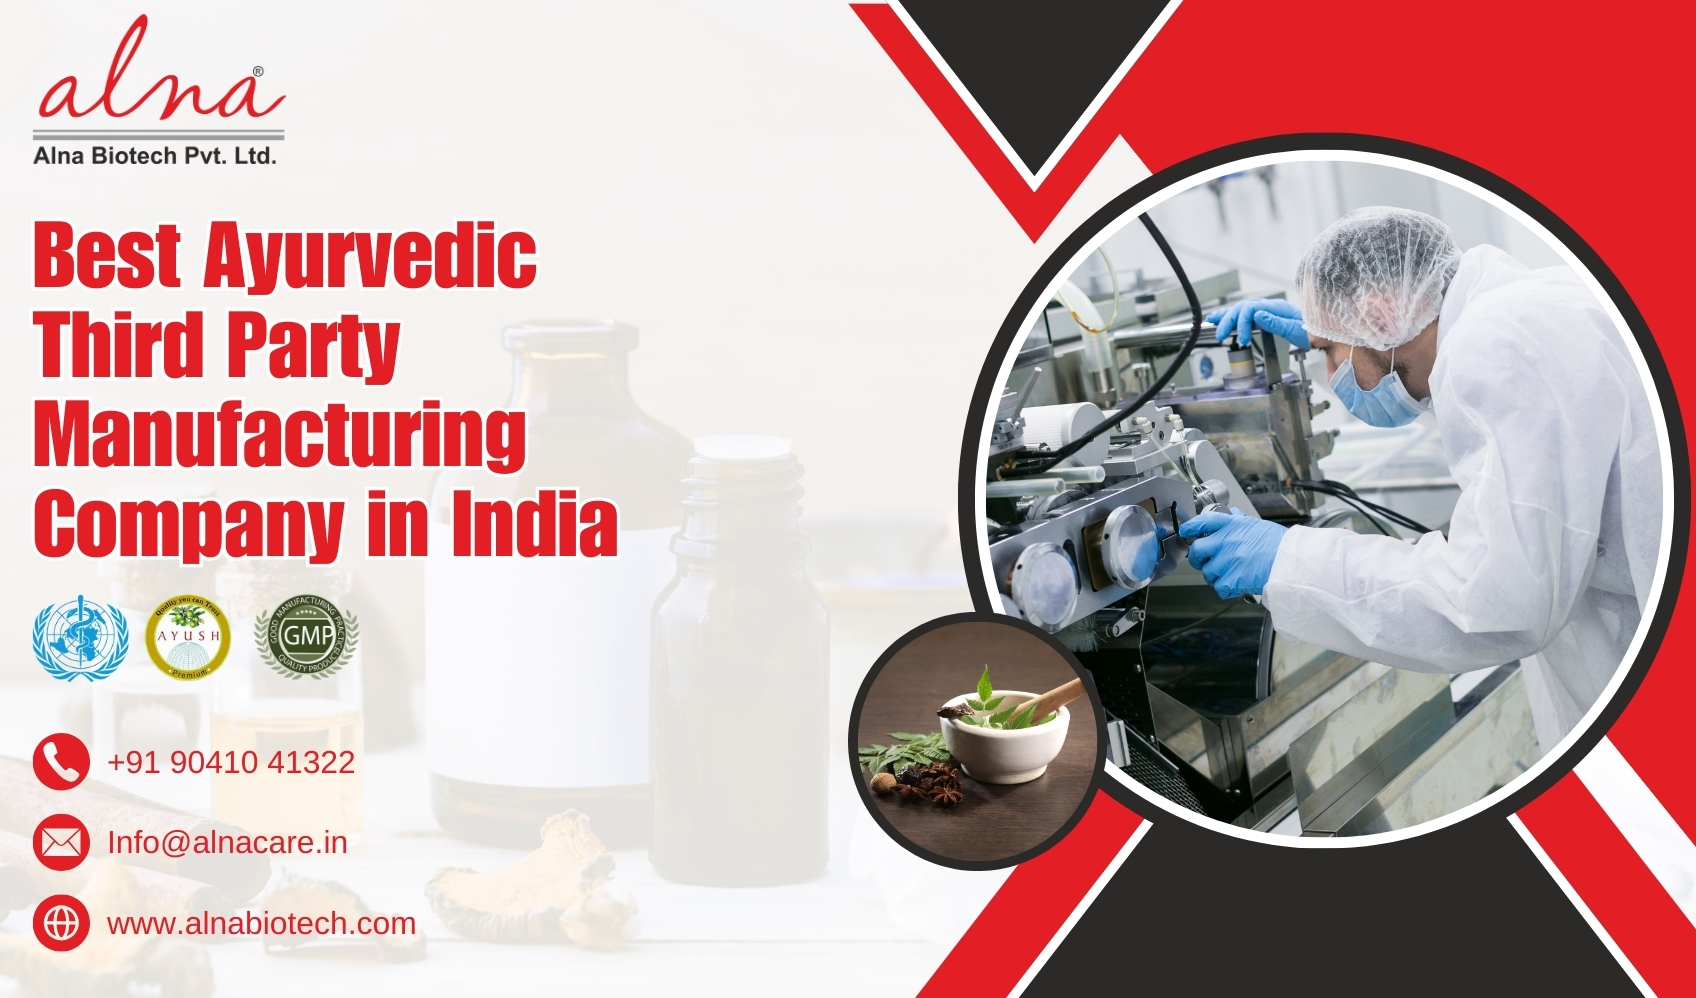 Alna biotech | Best Ayurvedic Third Party Manufacturing Company in India